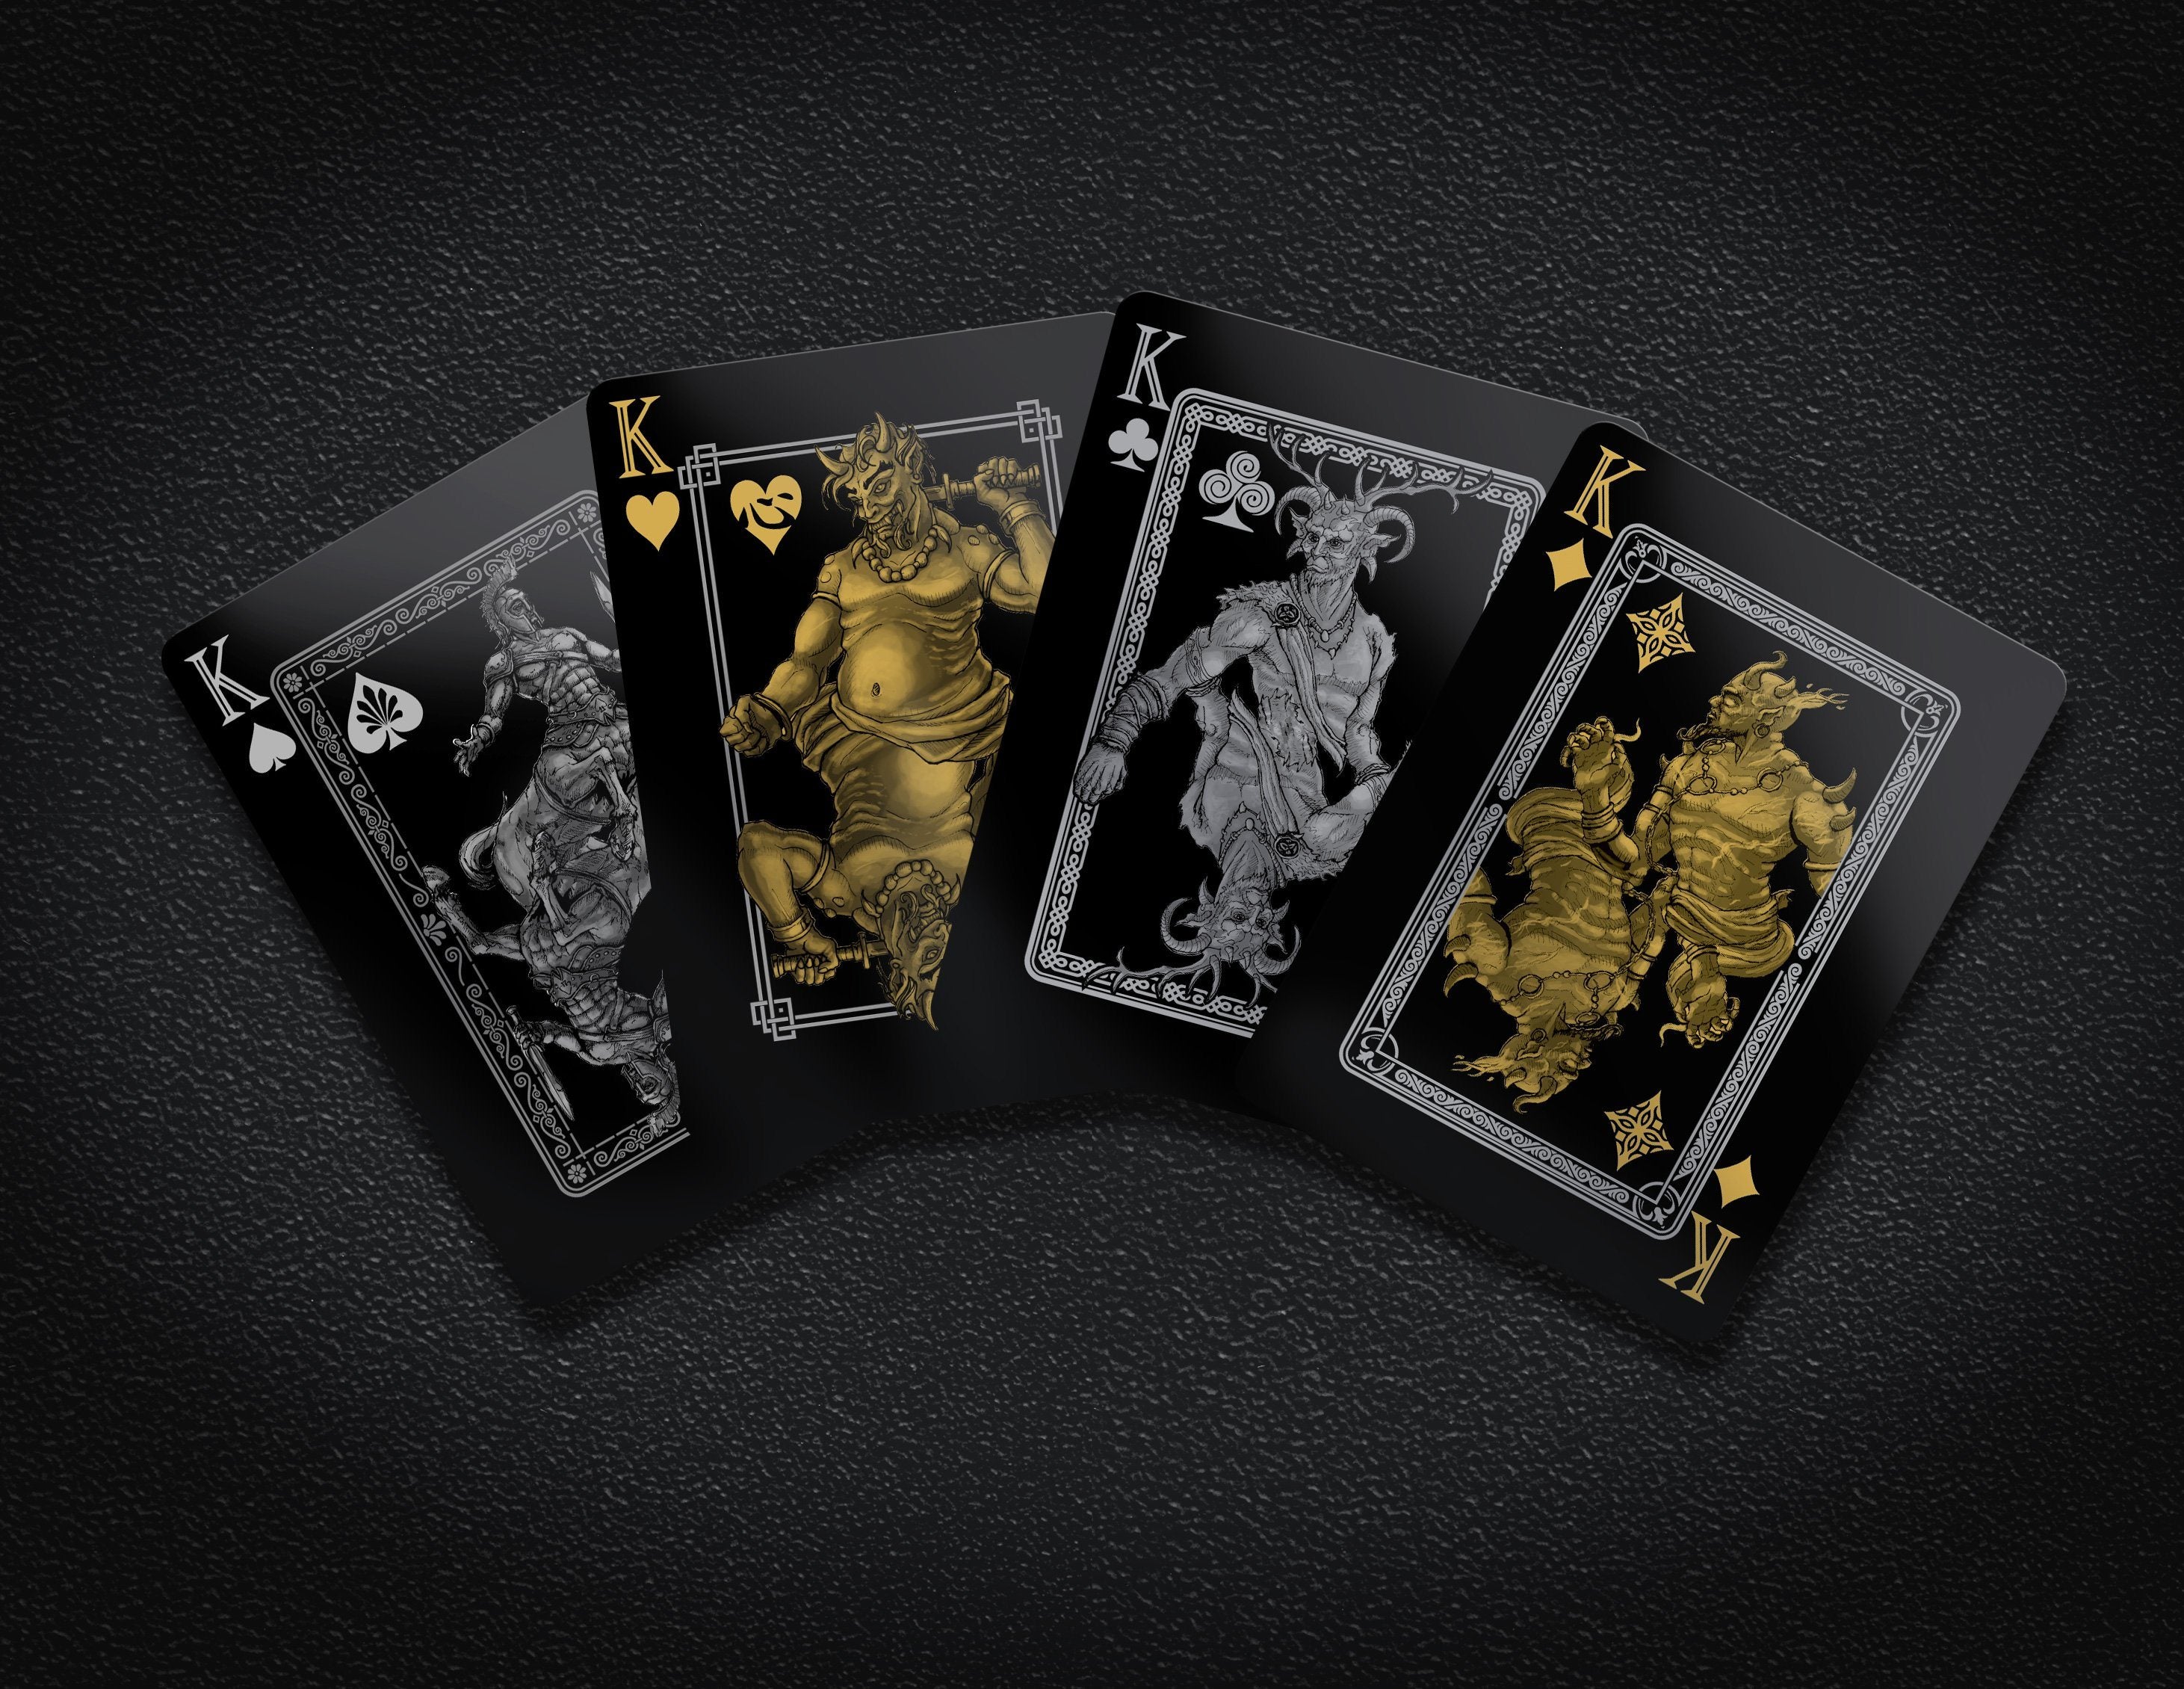 Monochromatic Black Playing Cards